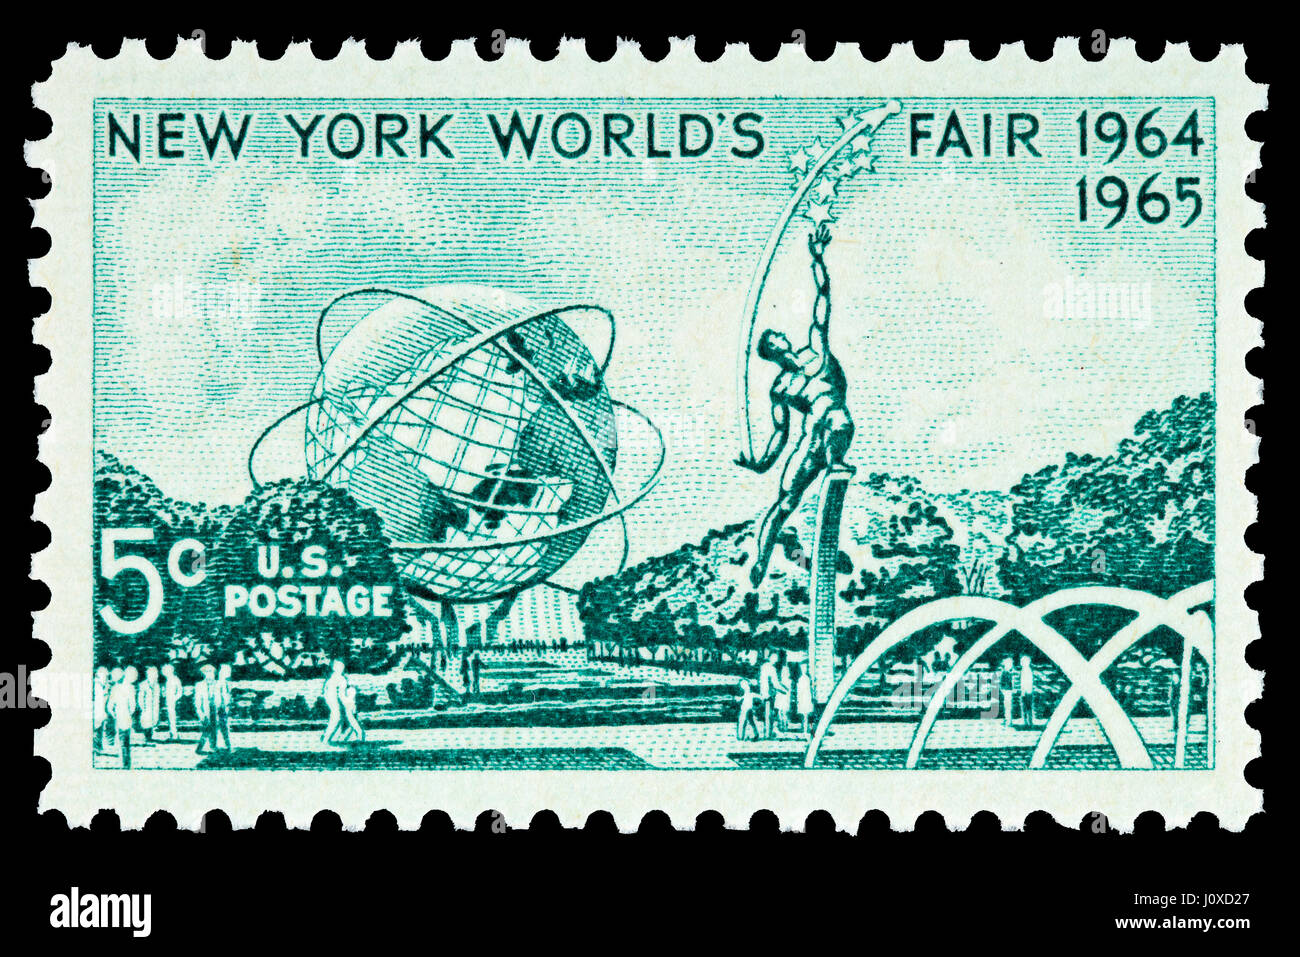 The 1964 New York World's Fair five-cent stamp postage depicting Unisphere (is a spherical stainless steel representation of the Earth).  The Unispher Stock Photo